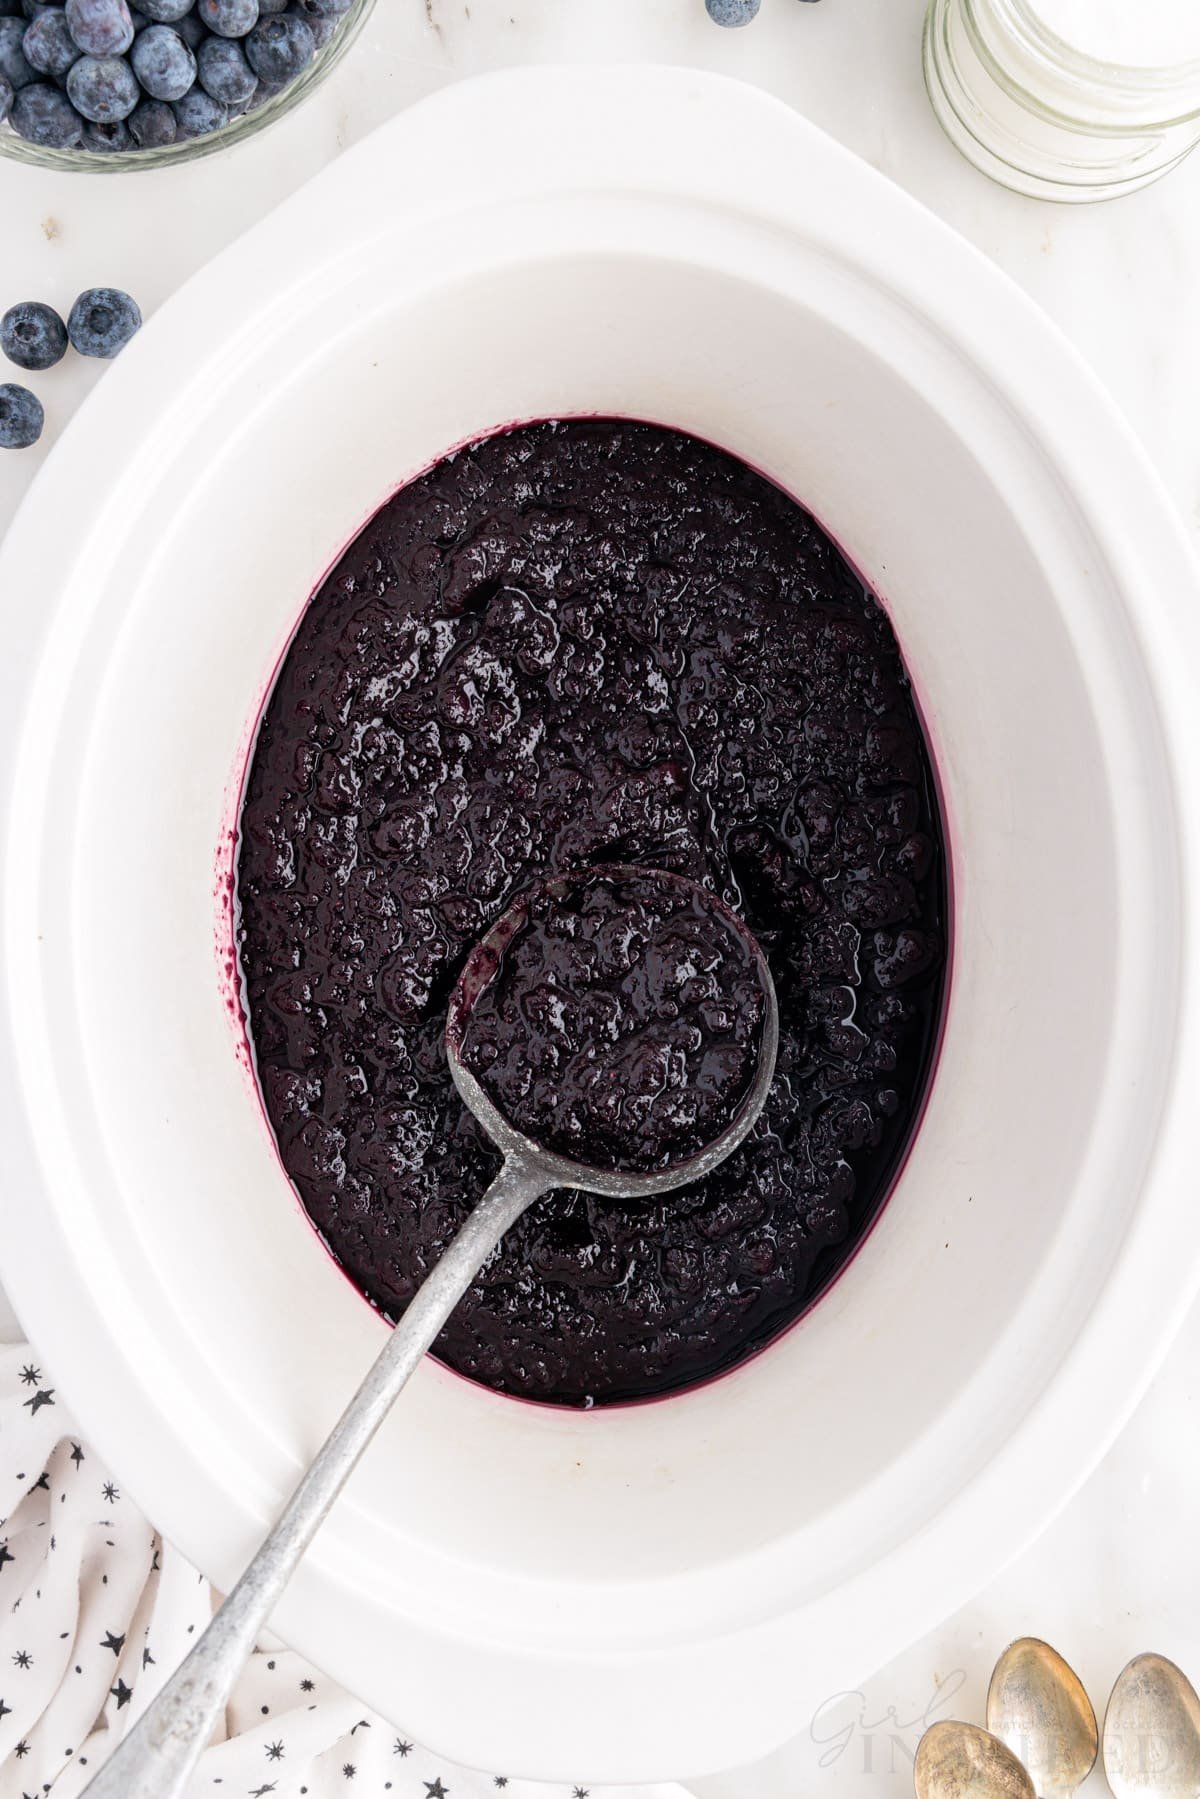 Ladle inserted in Blueberry Butter in a crockpot.